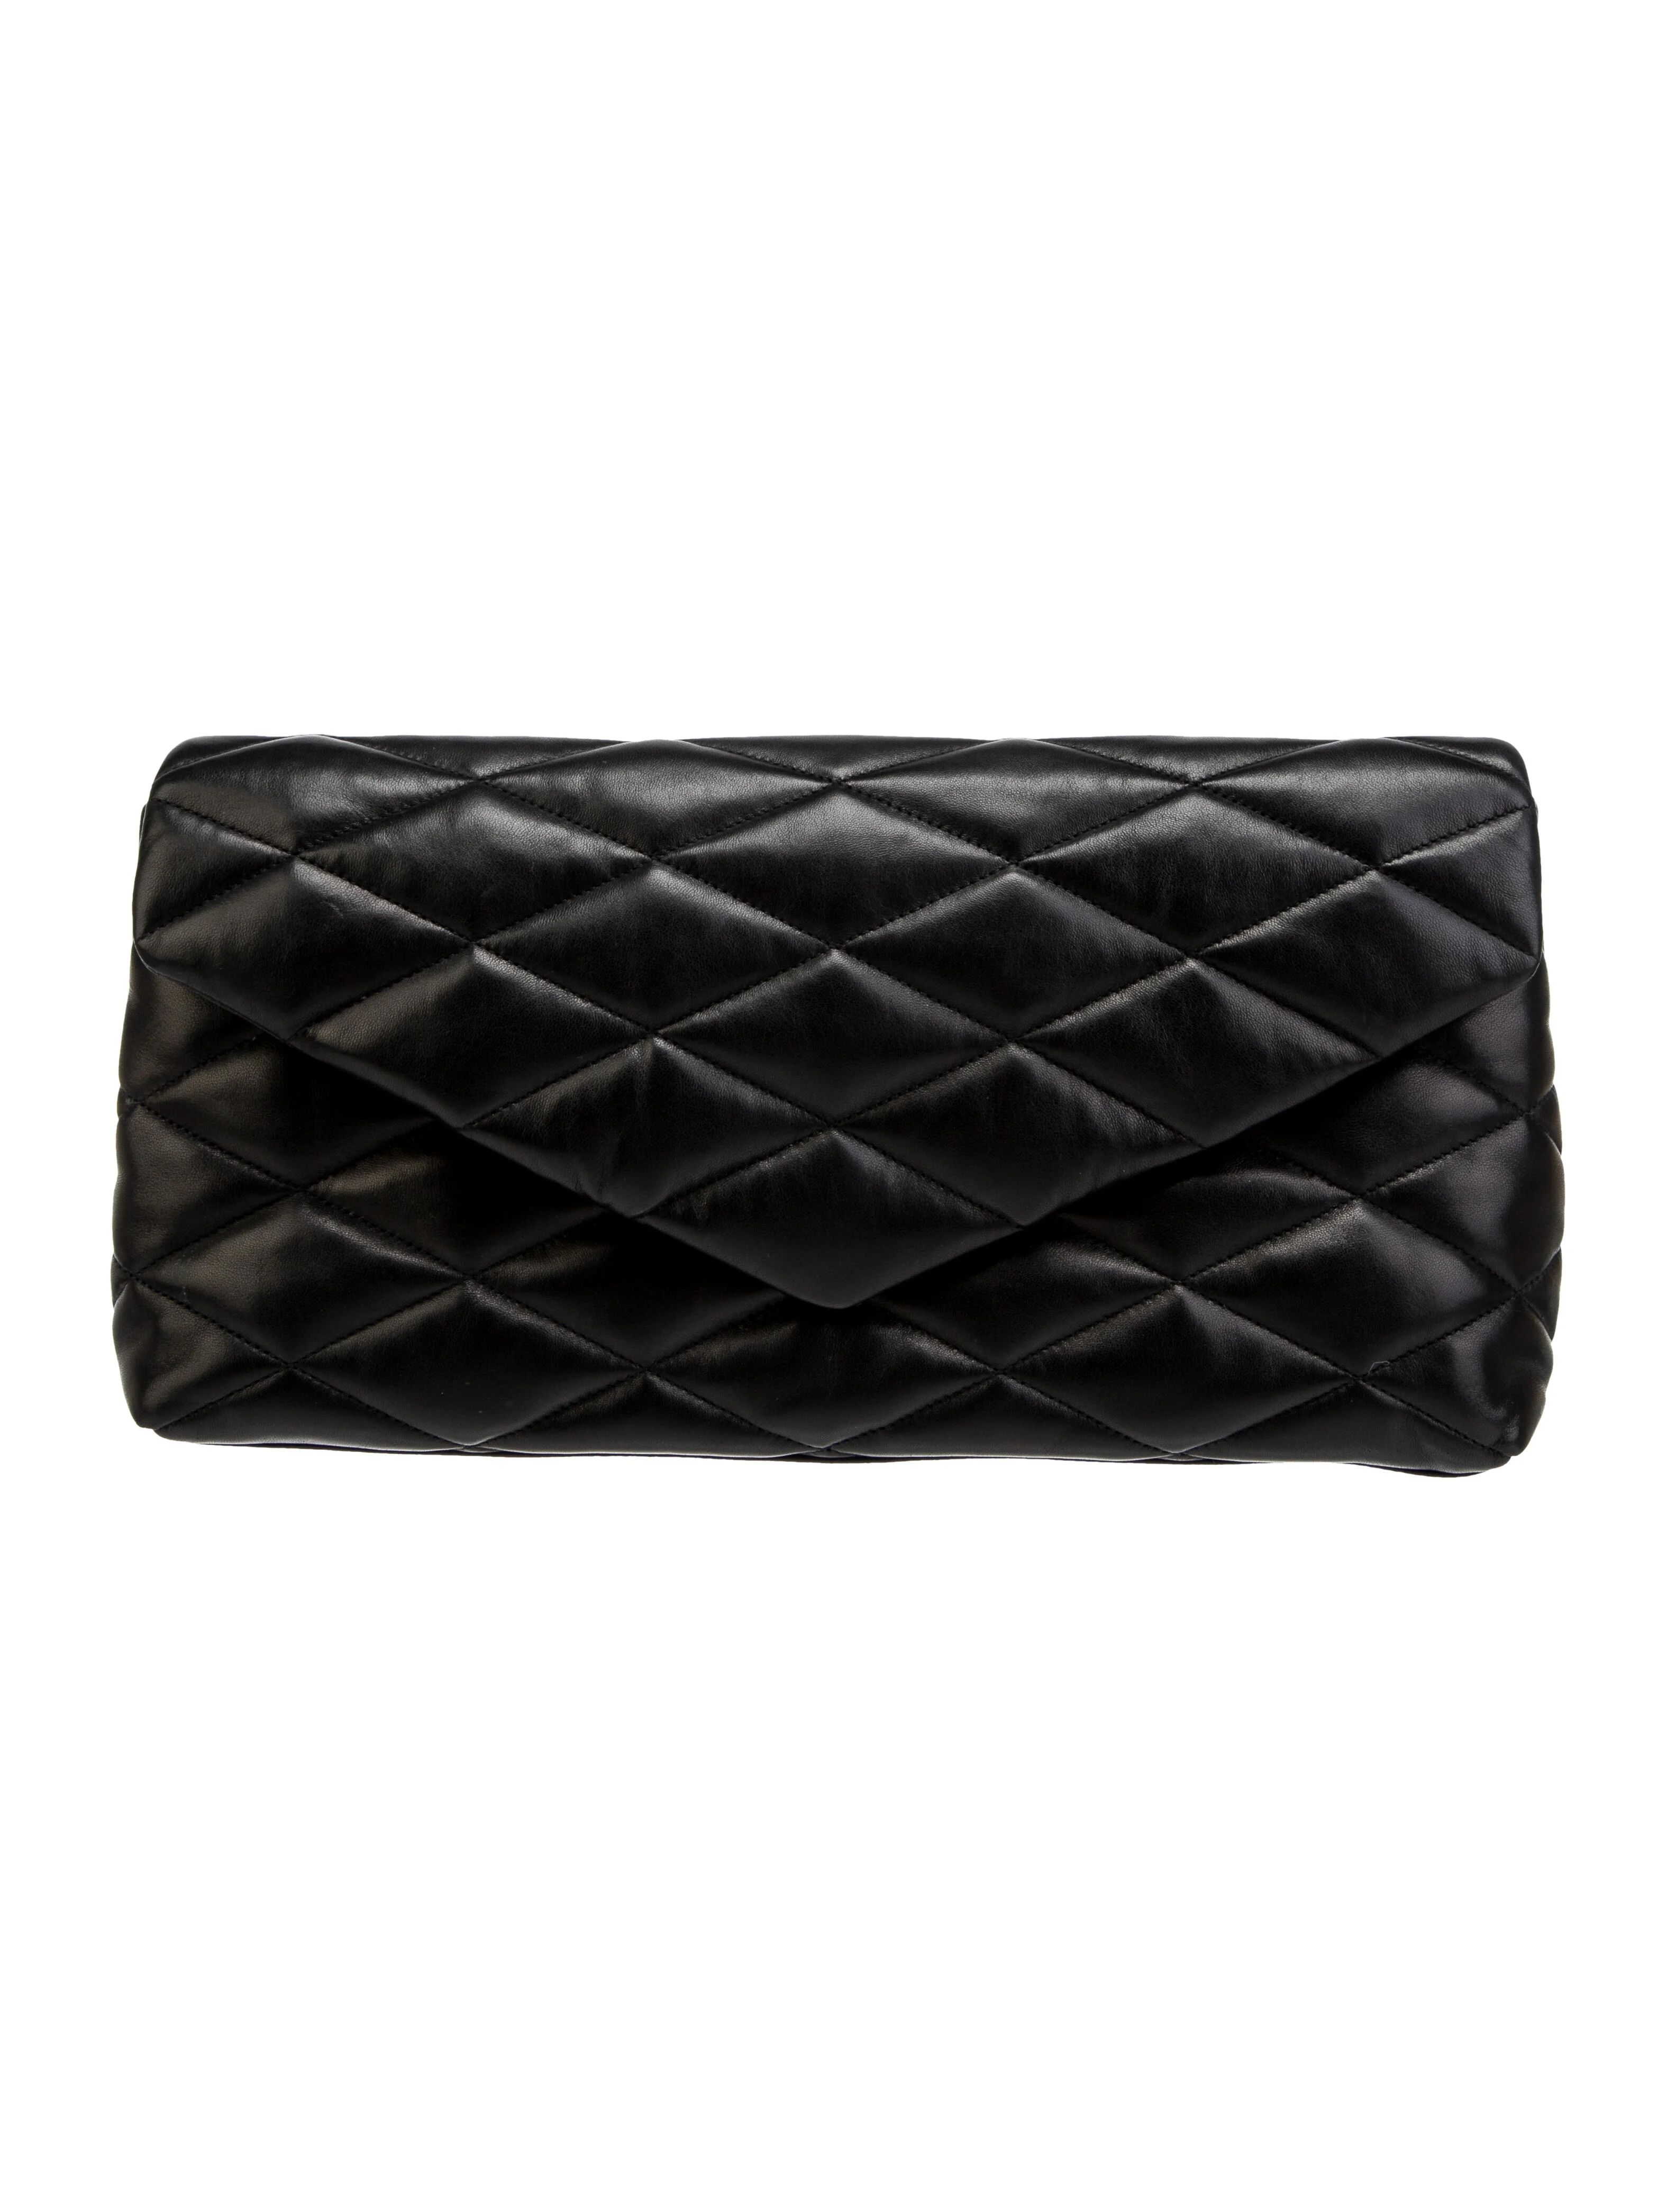 2022 Large Sade Clutch | The RealReal